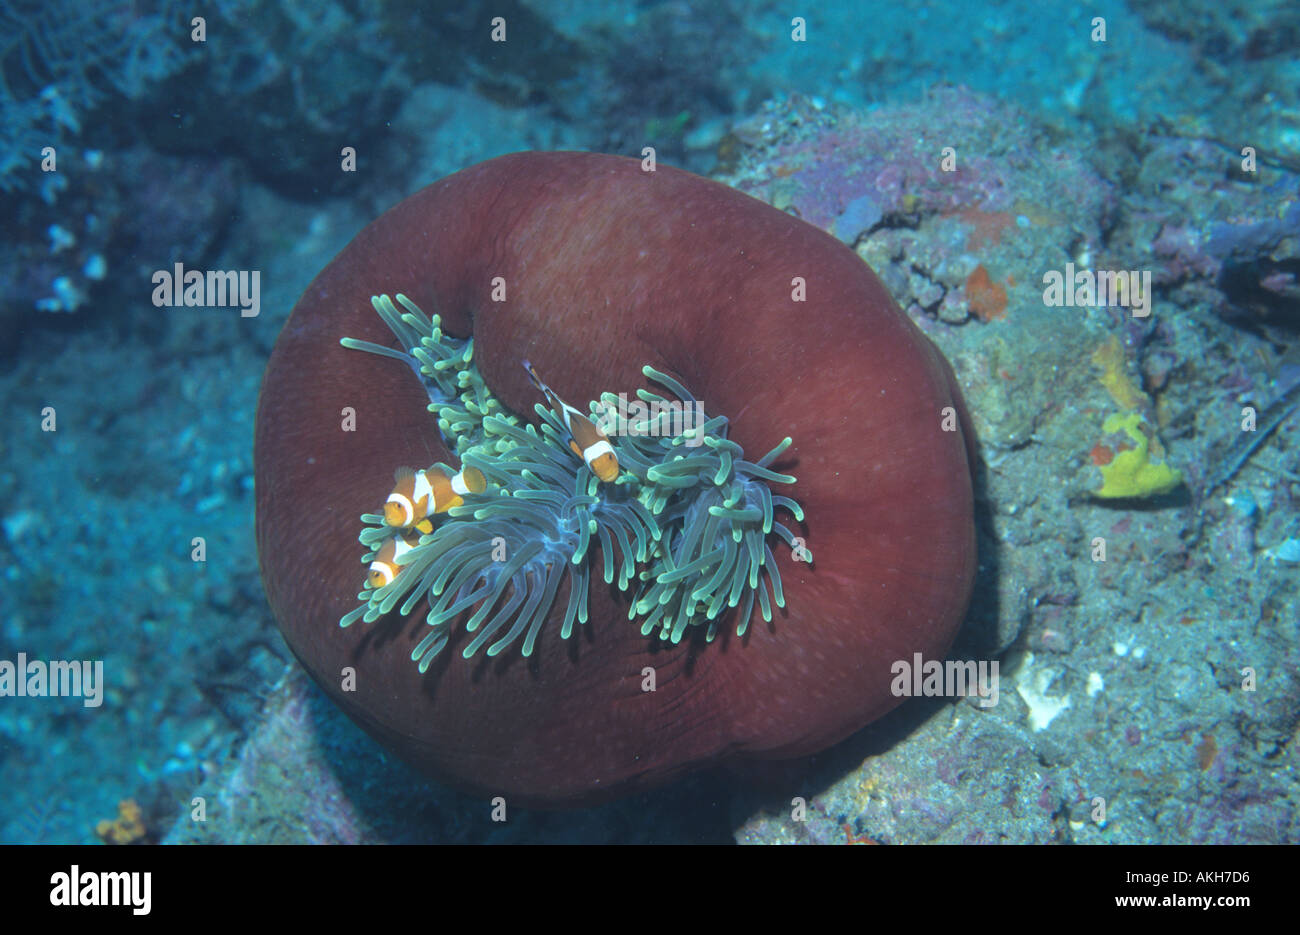 Ocellated or Common Anemonefish Amphiprion ocellaris also called clownfish shut out of their anemone Heteractis magnifica Partri Stock Photo